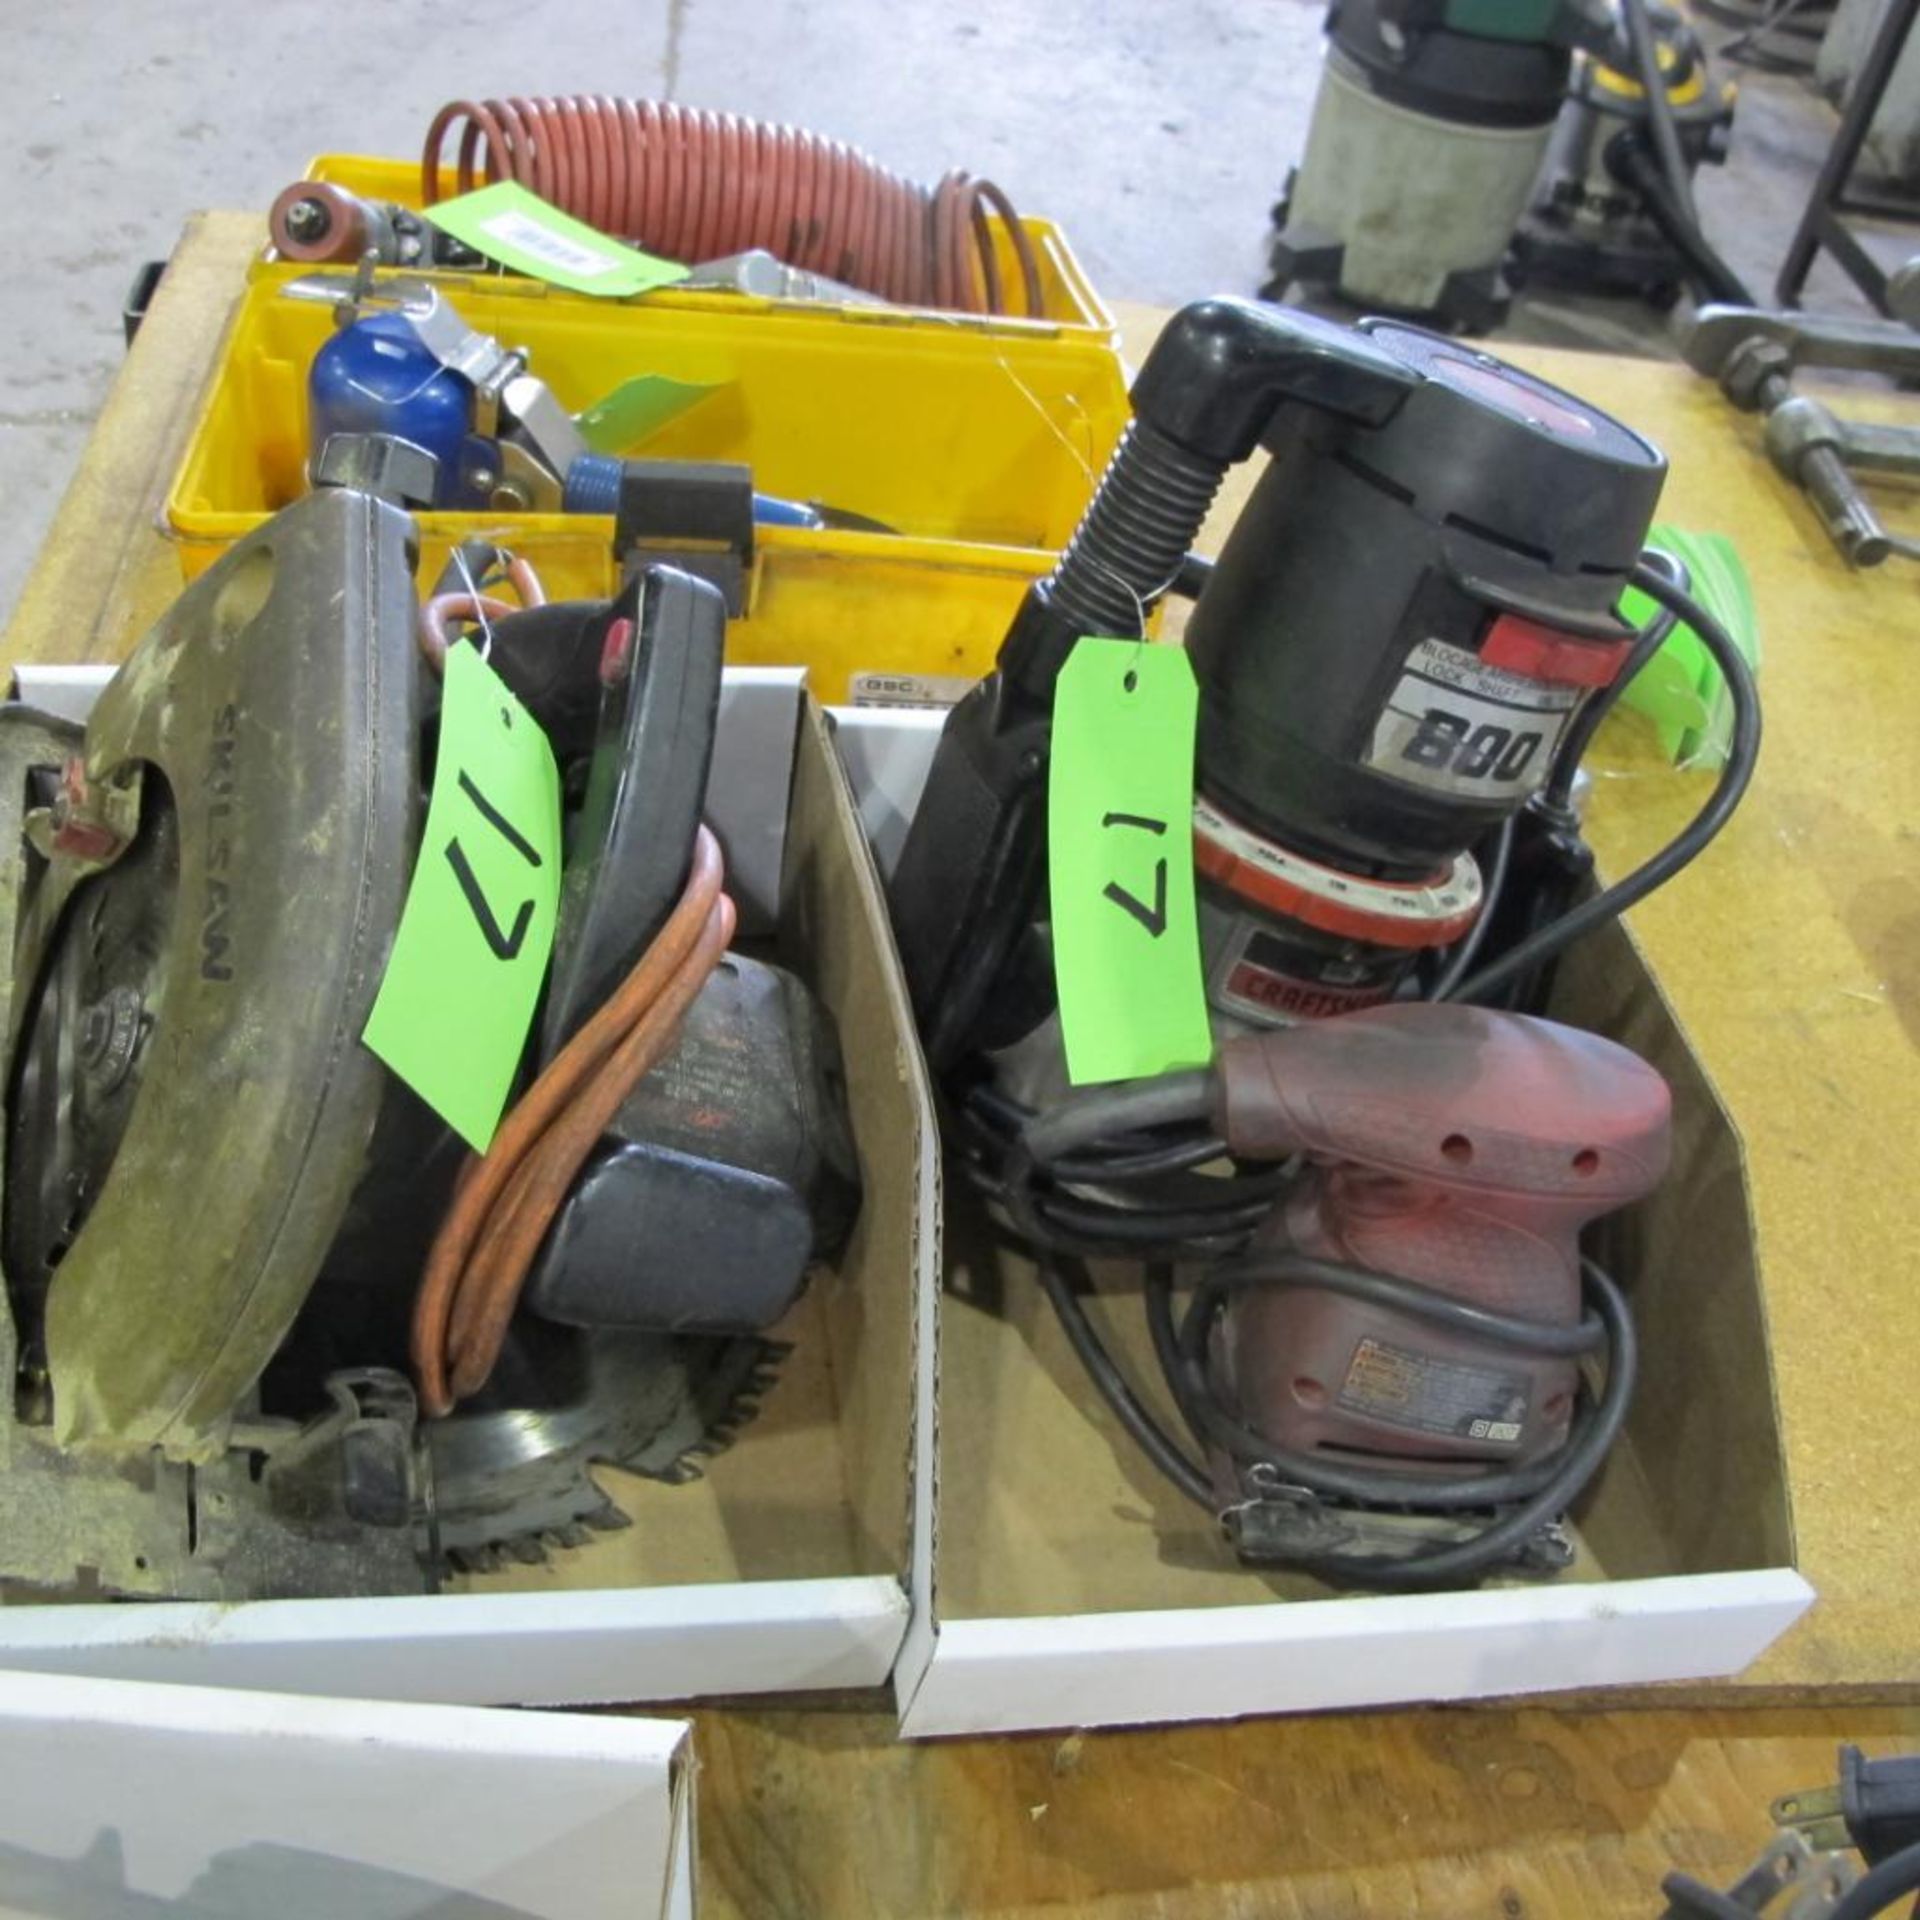 LOT OF 2 BOXES W/SKILLSAW 7 1/4" CIRCULAR SAW, CRAFTSMAN ROUTER AND PALM SANDER